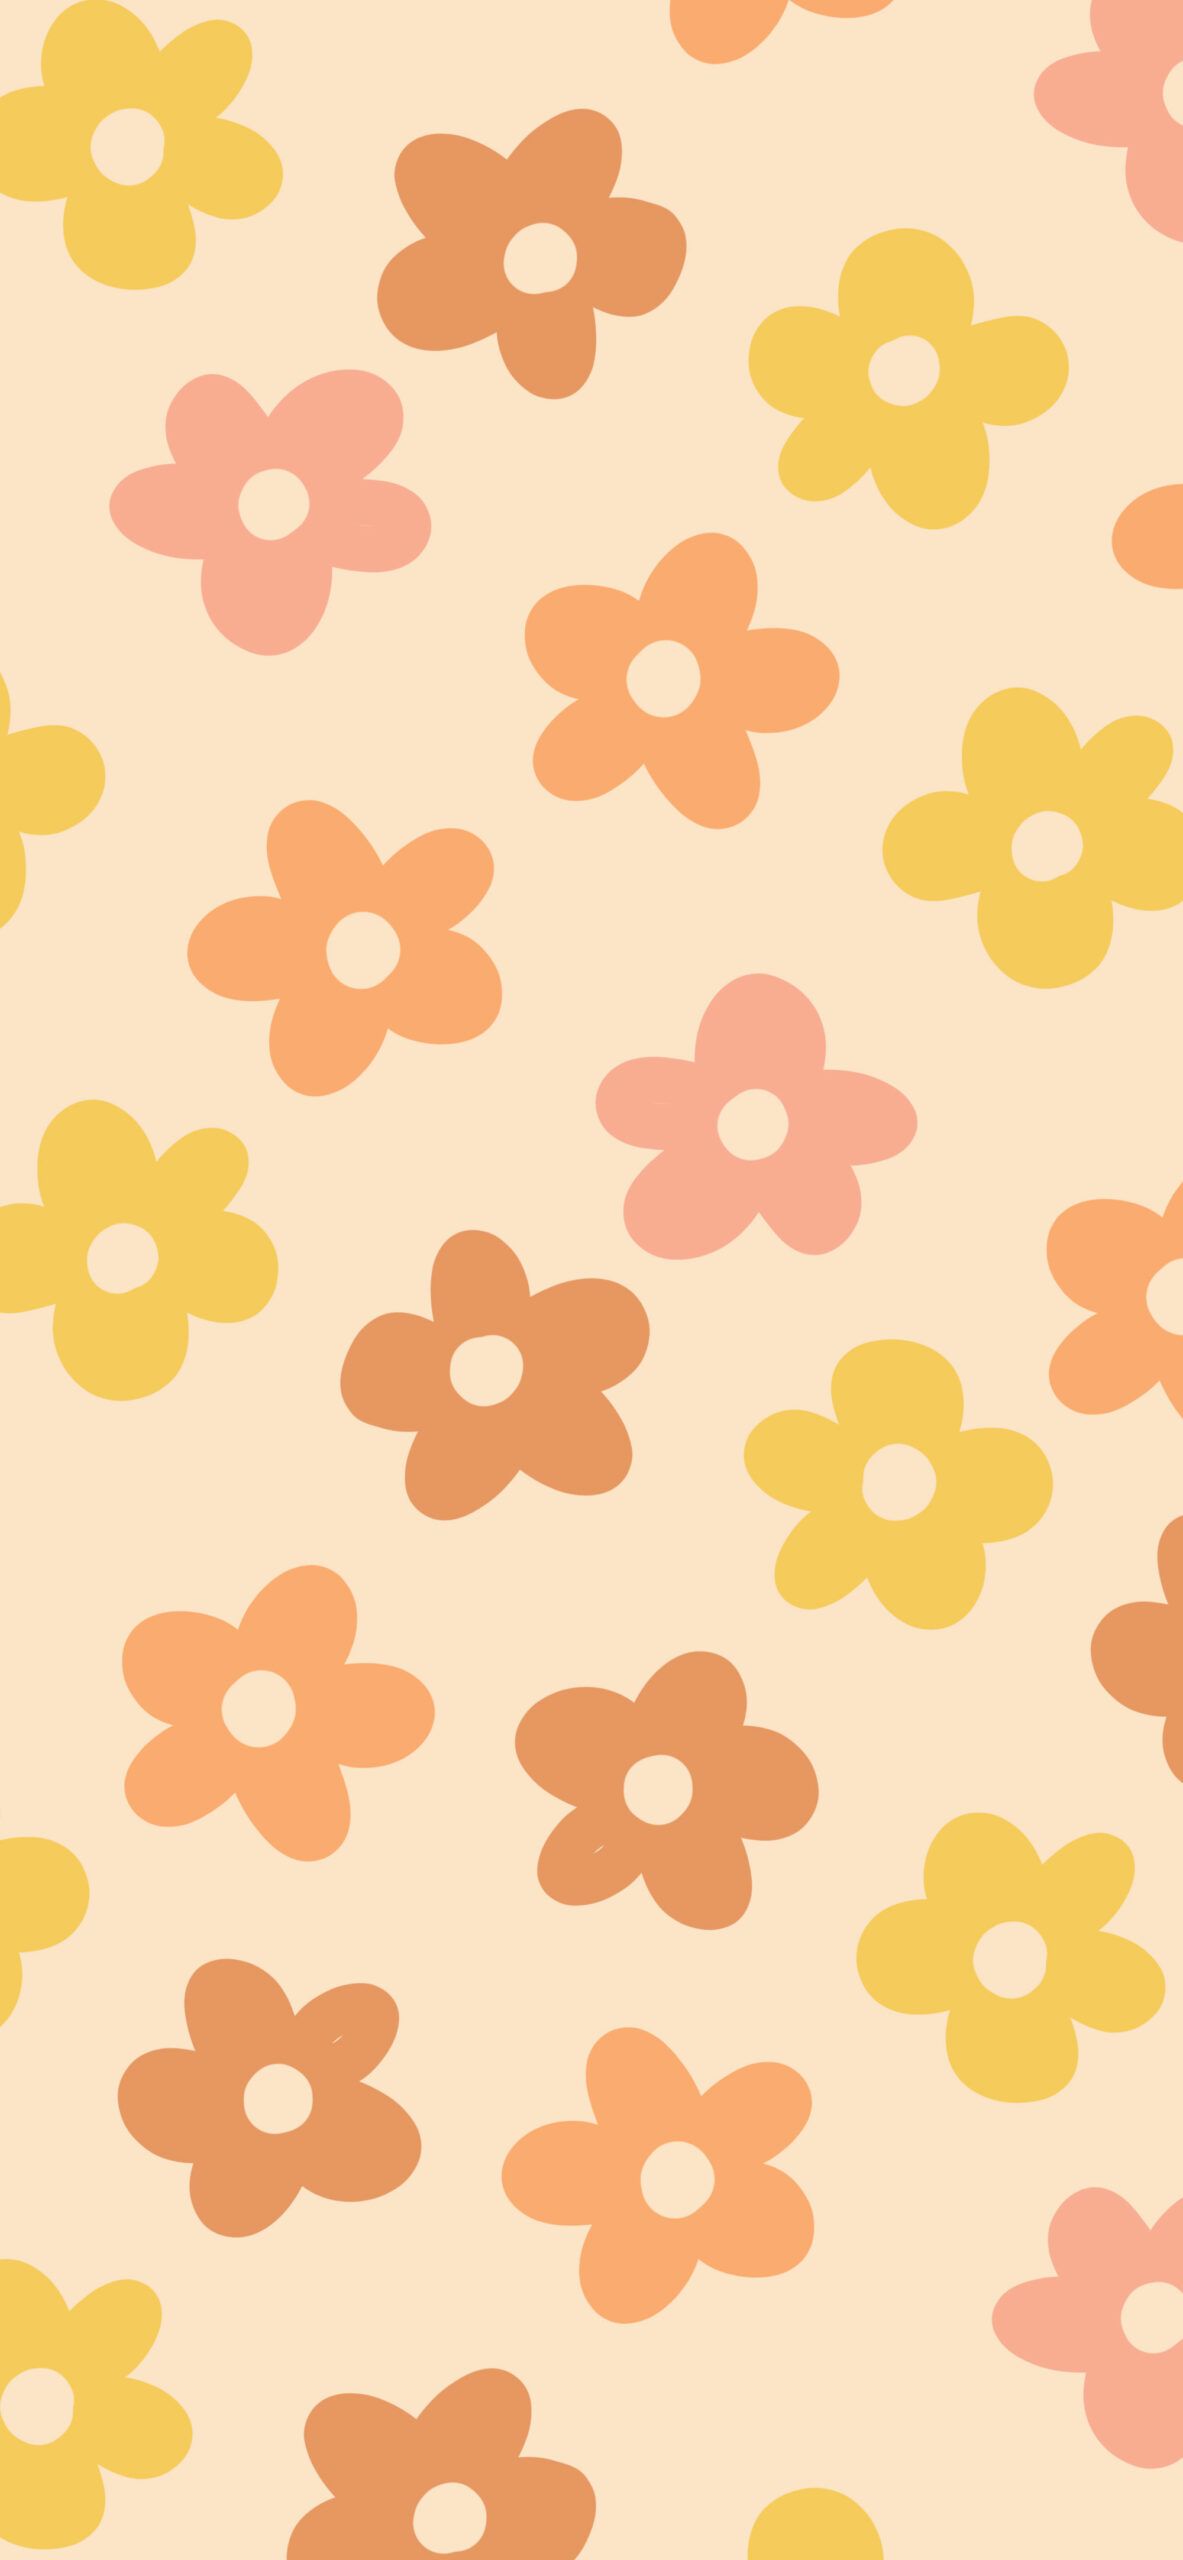 A wallpaper with small flowers in orange, yellow, and pink on a cream background. - Yellow, flower, pattern